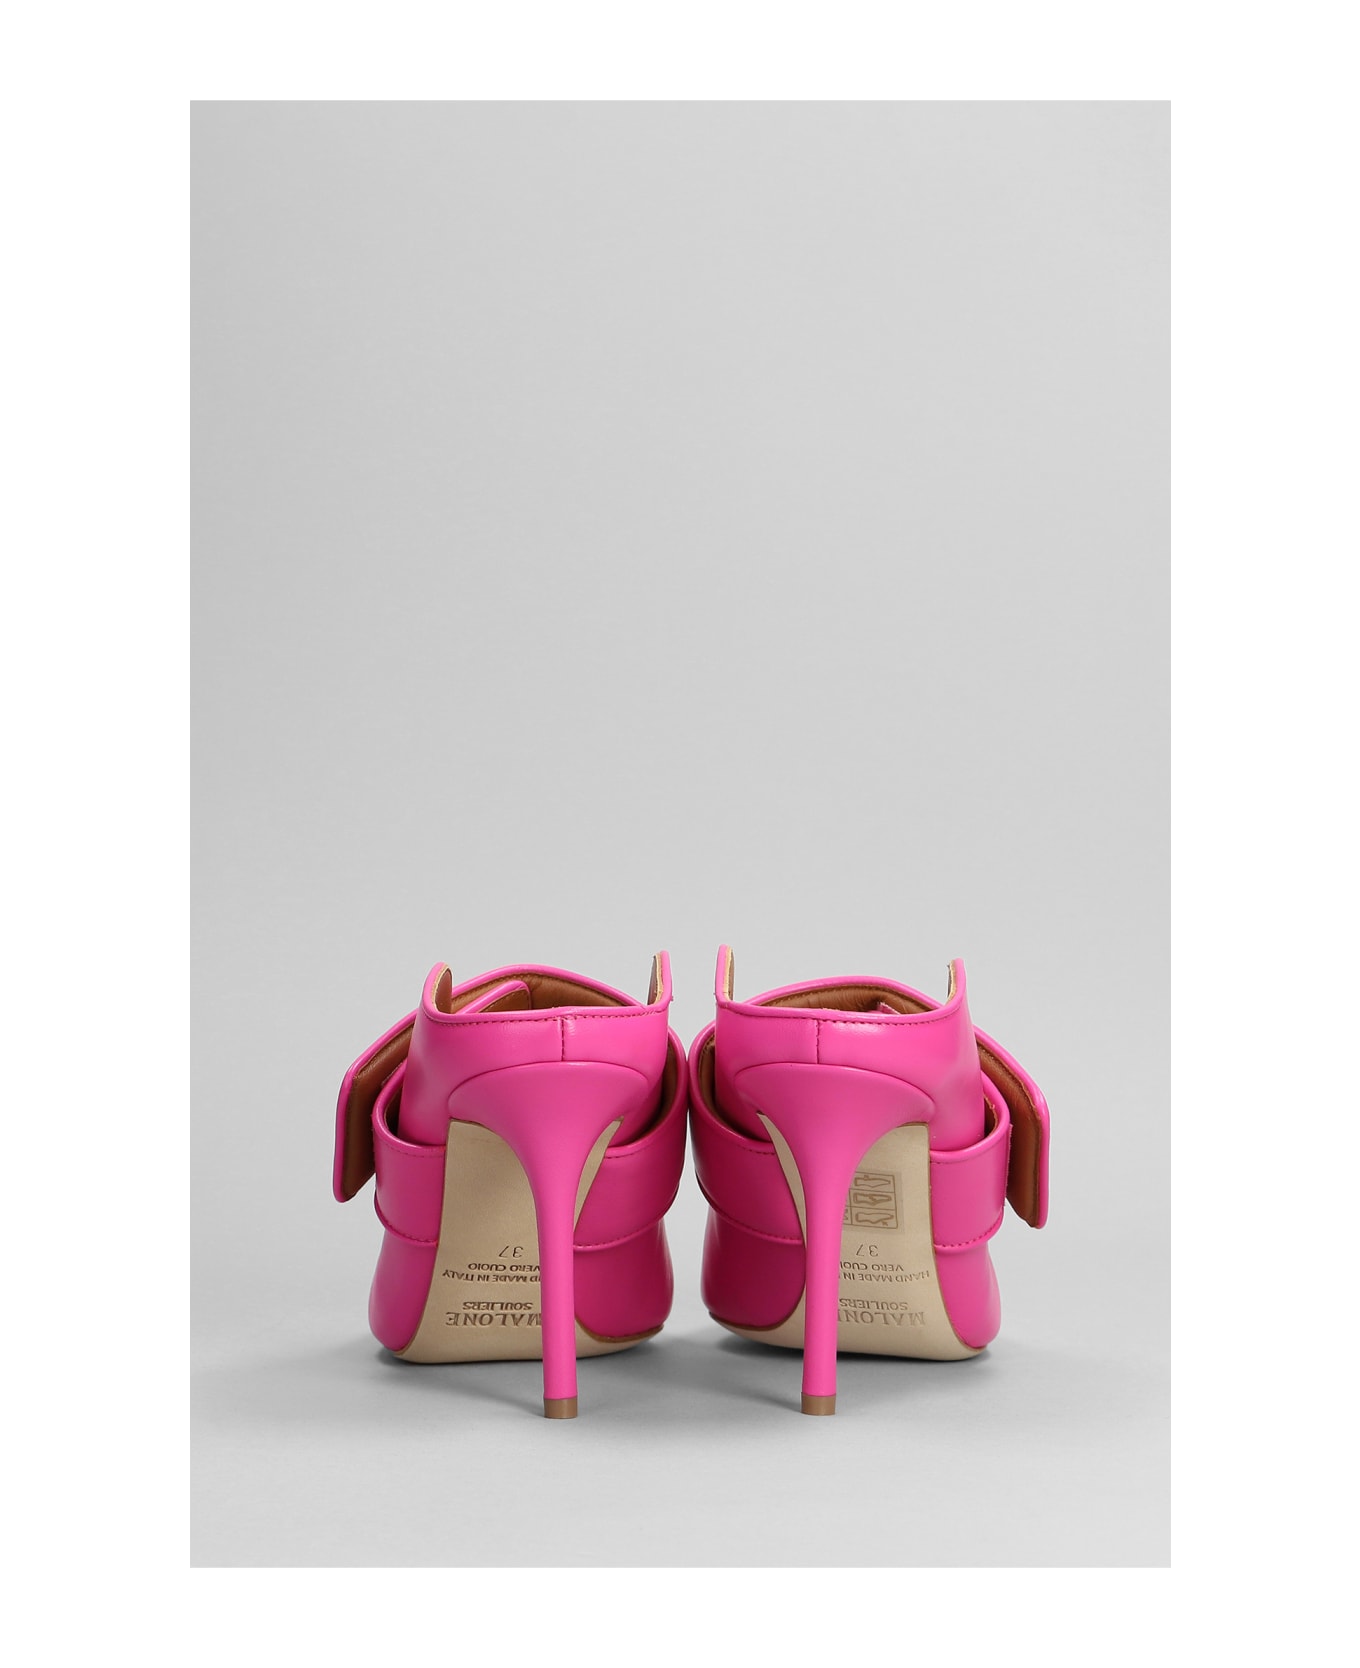 Malone Souliers Helene Pumps In Rose-pink Leather - rose-pink